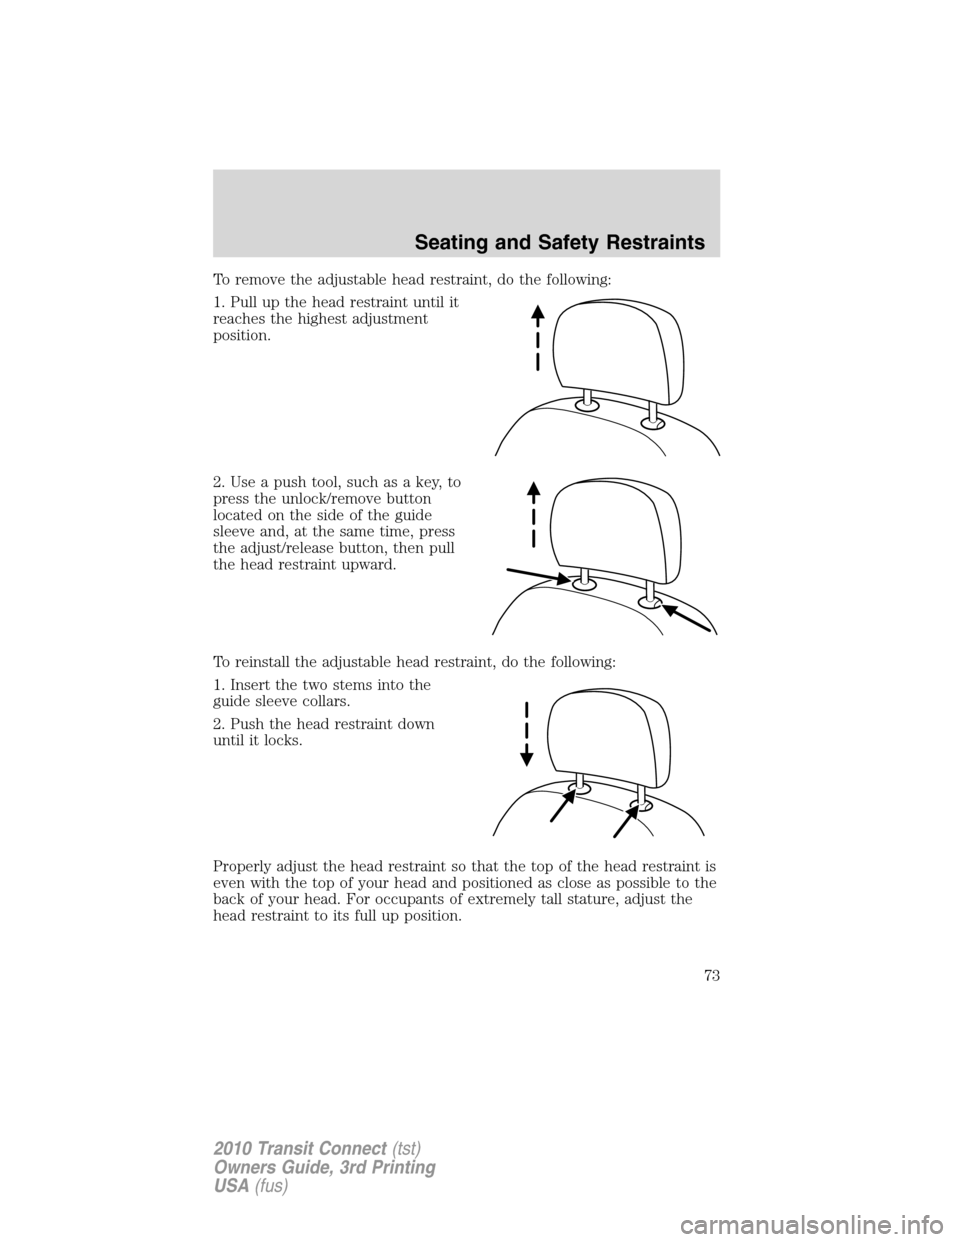 FORD TRANSIT CONNECT 2010 1.G Owners Manual To remove the adjustable head restraint, do the following:
1. Pull up the head restraint until it
reaches the highest adjustment
position.
2. Use a push tool, such as a key, to
press the unlock/remove